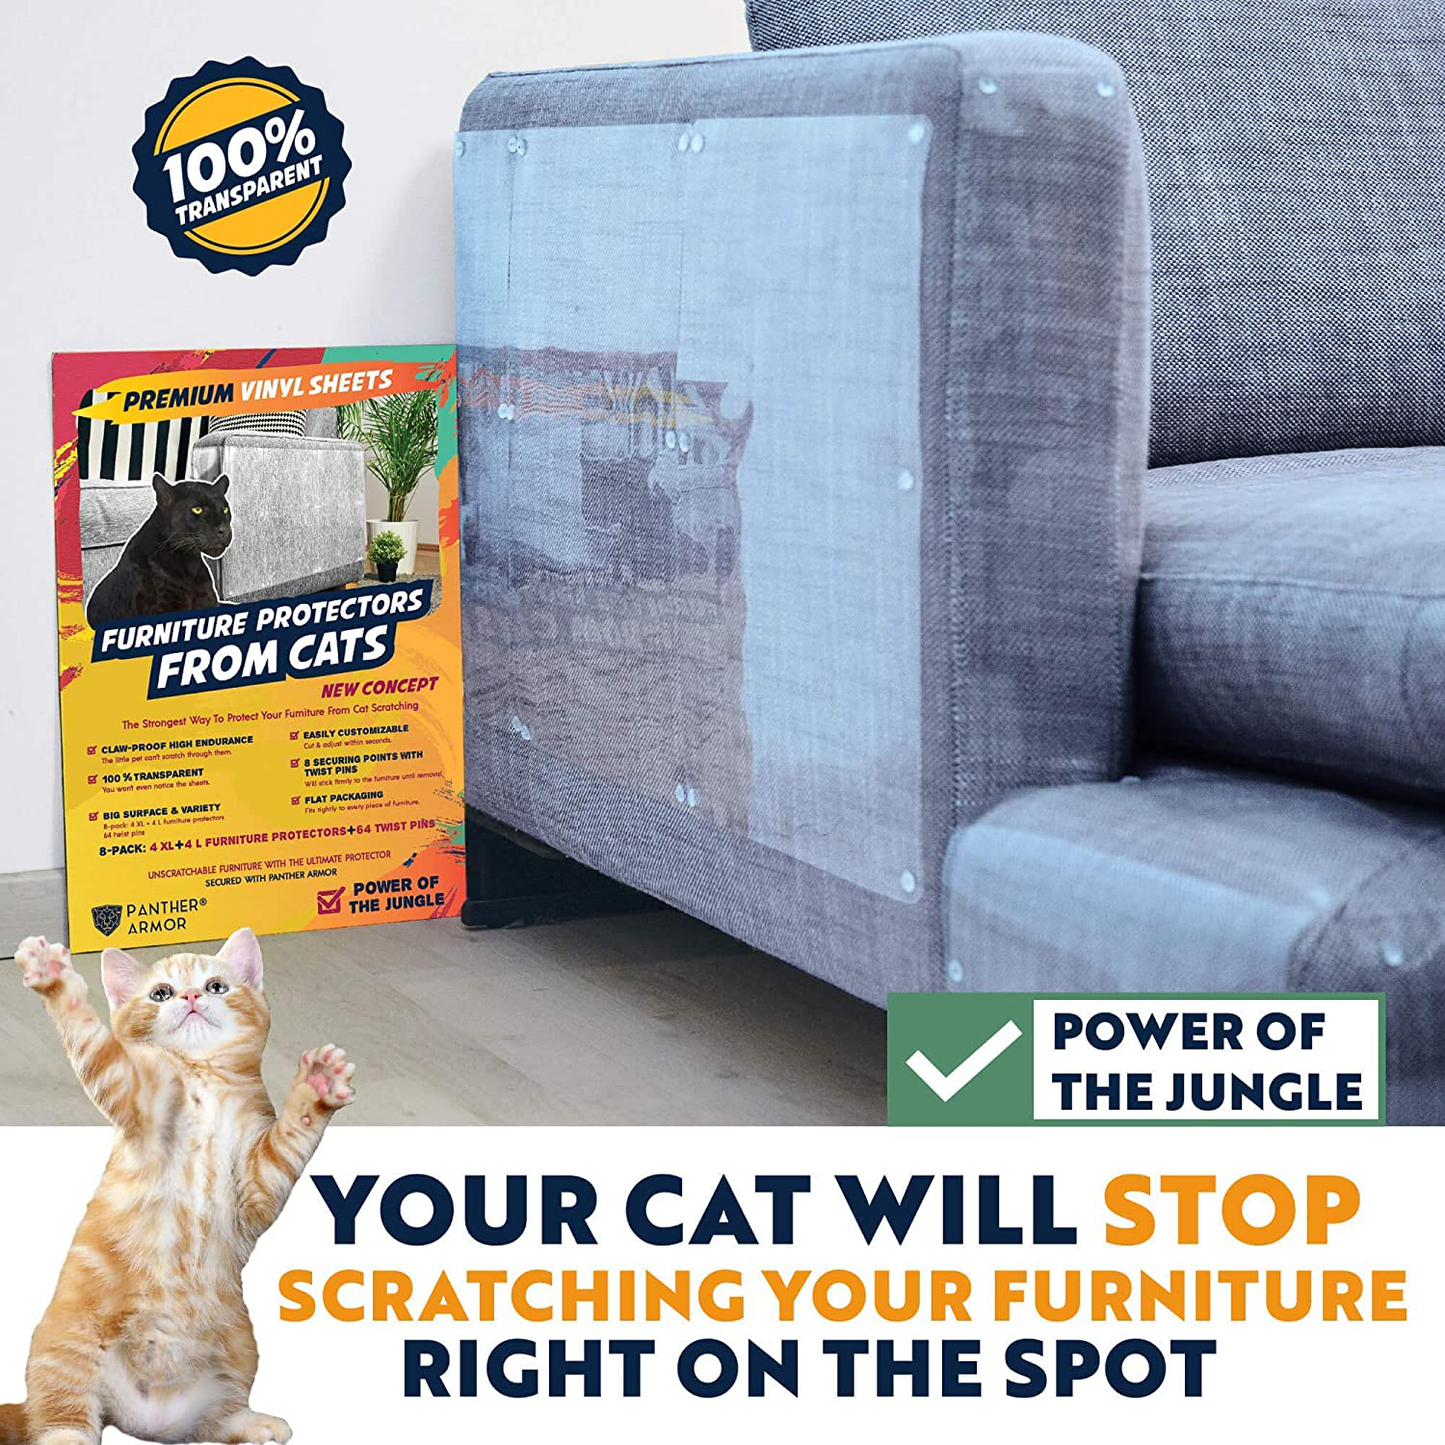 Panther Armor Furniture Protectors from Cat Scratch - 8(Eight)-Pack – Couch Guards for Cats - 4-Pack XL 17"L 12"W + 4-Pack Large 17"L 10"W Cat Scratch Deterrent - Couch Corner Cat Scratch Repellent